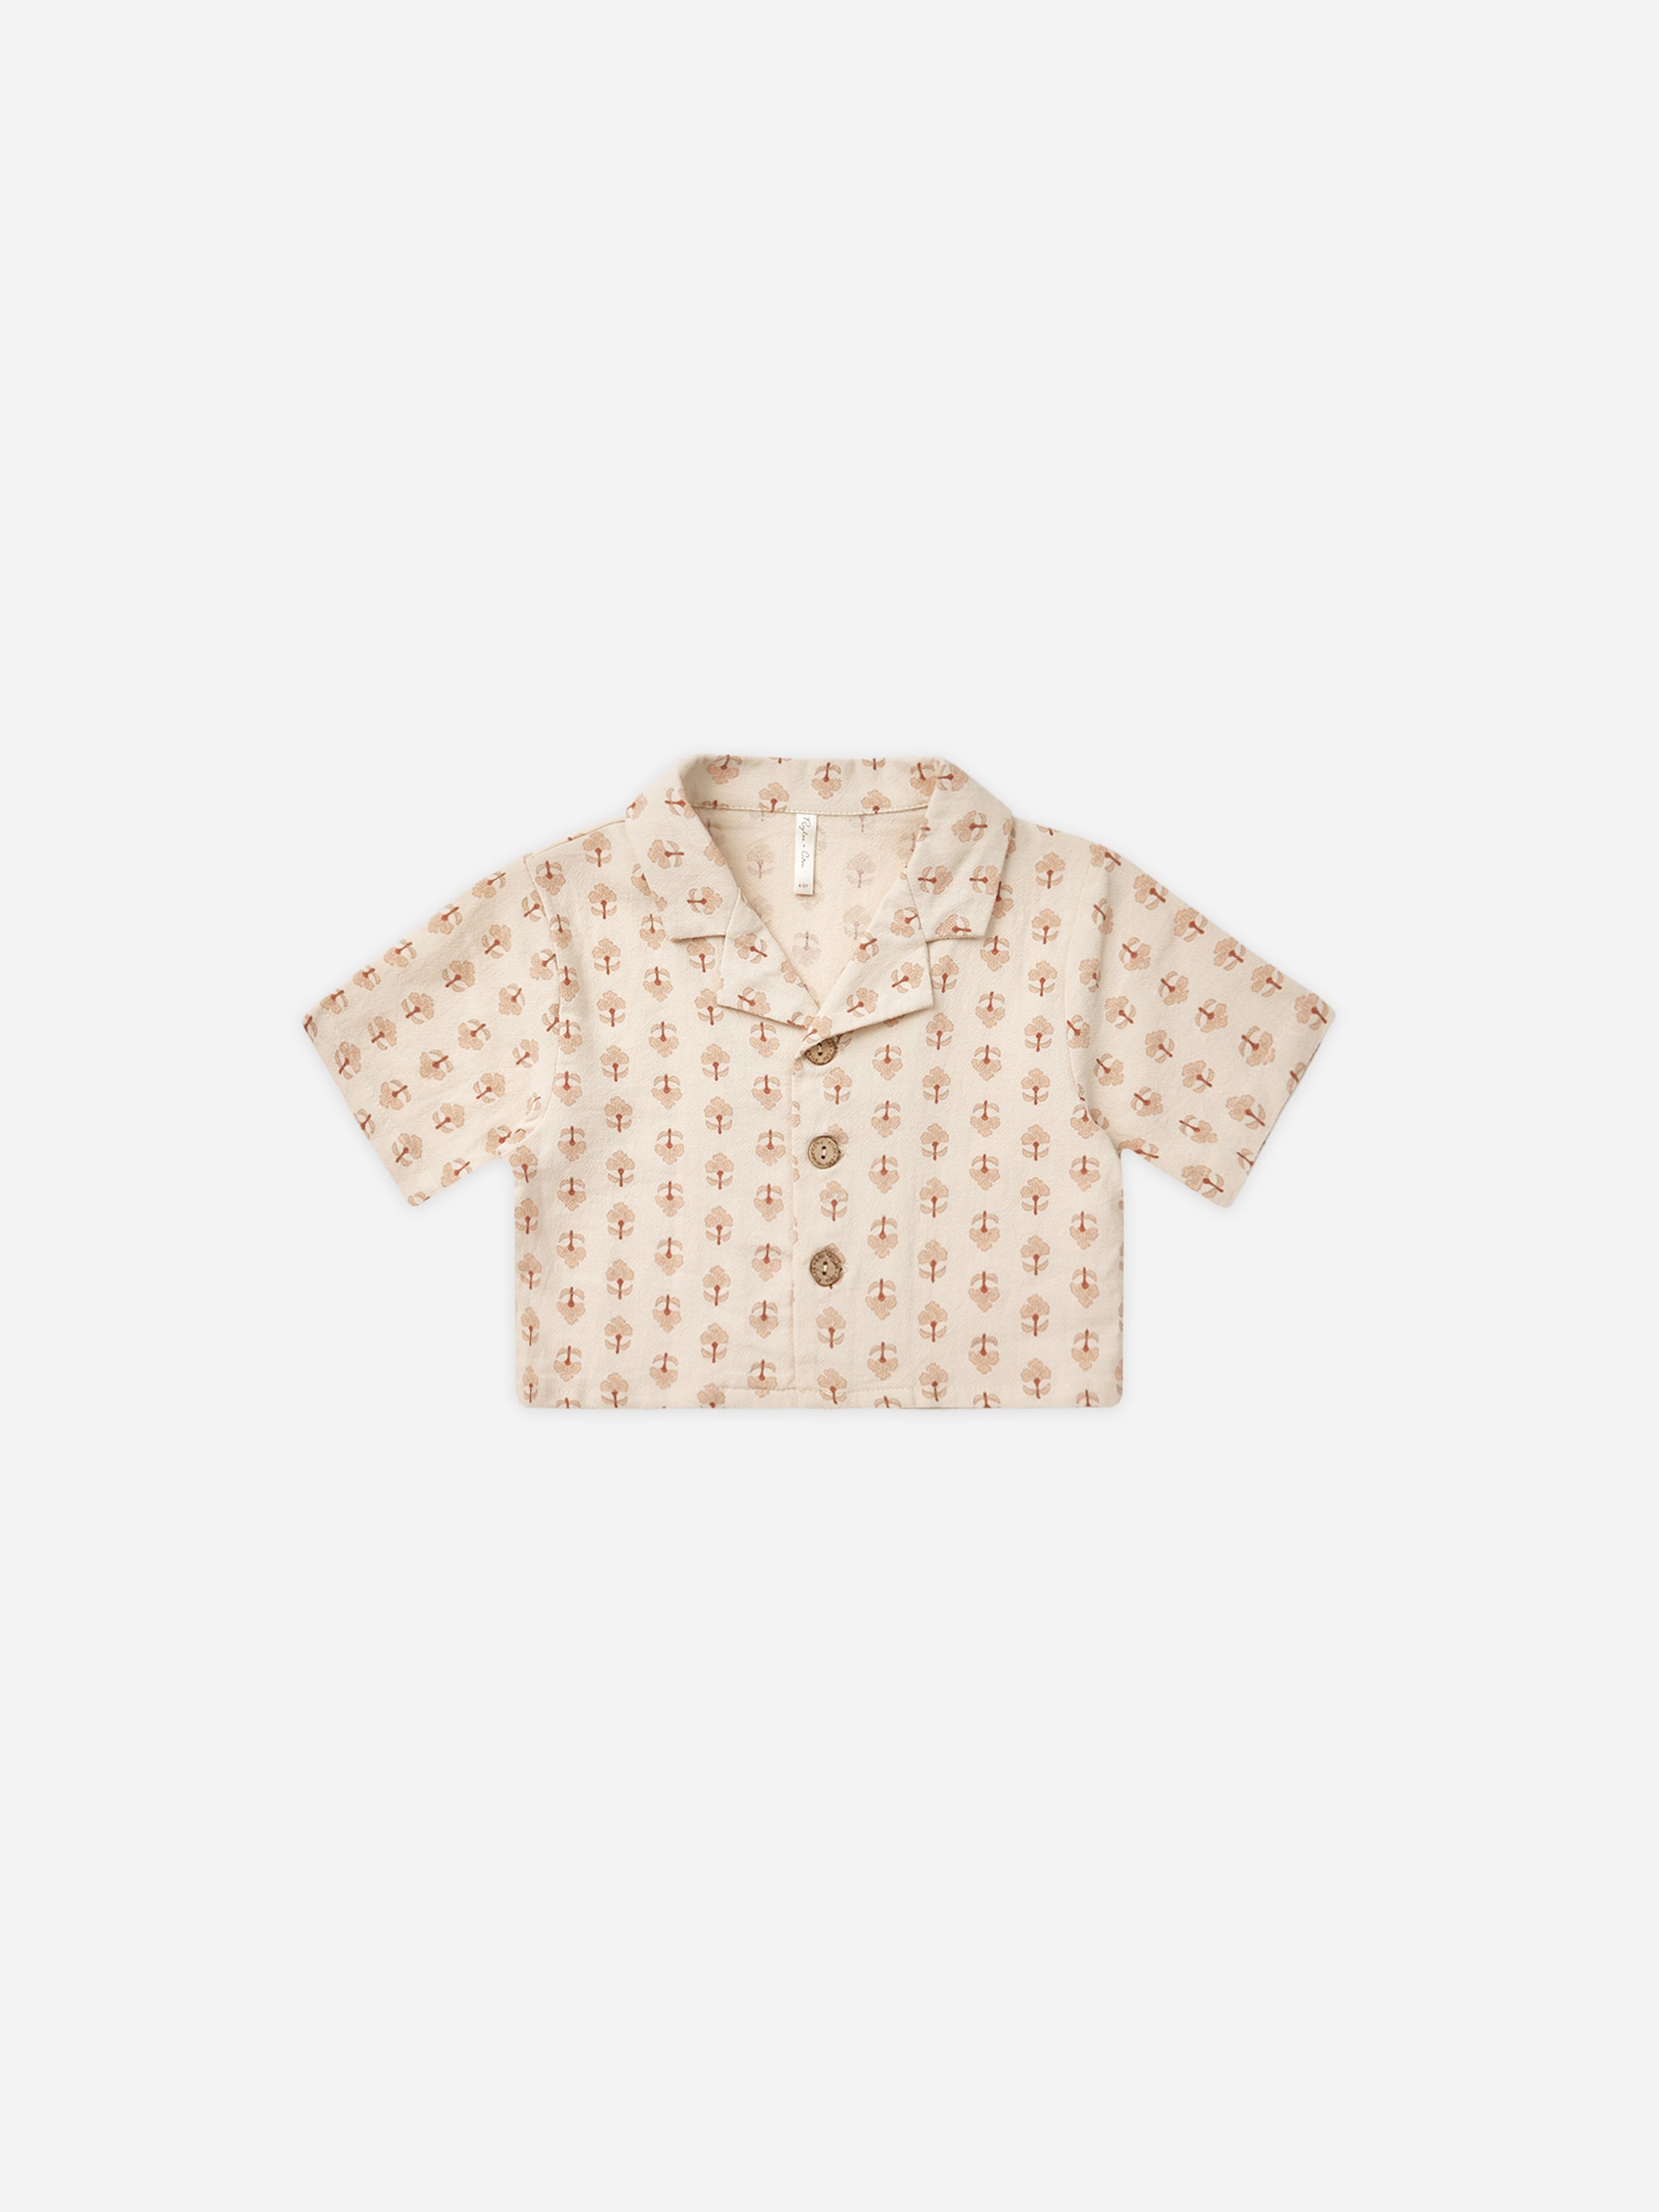 Cropped Collared Shirt || Motif - Rylee + Cru | Kids Clothes | Trendy Baby Clothes | Modern Infant Outfits |